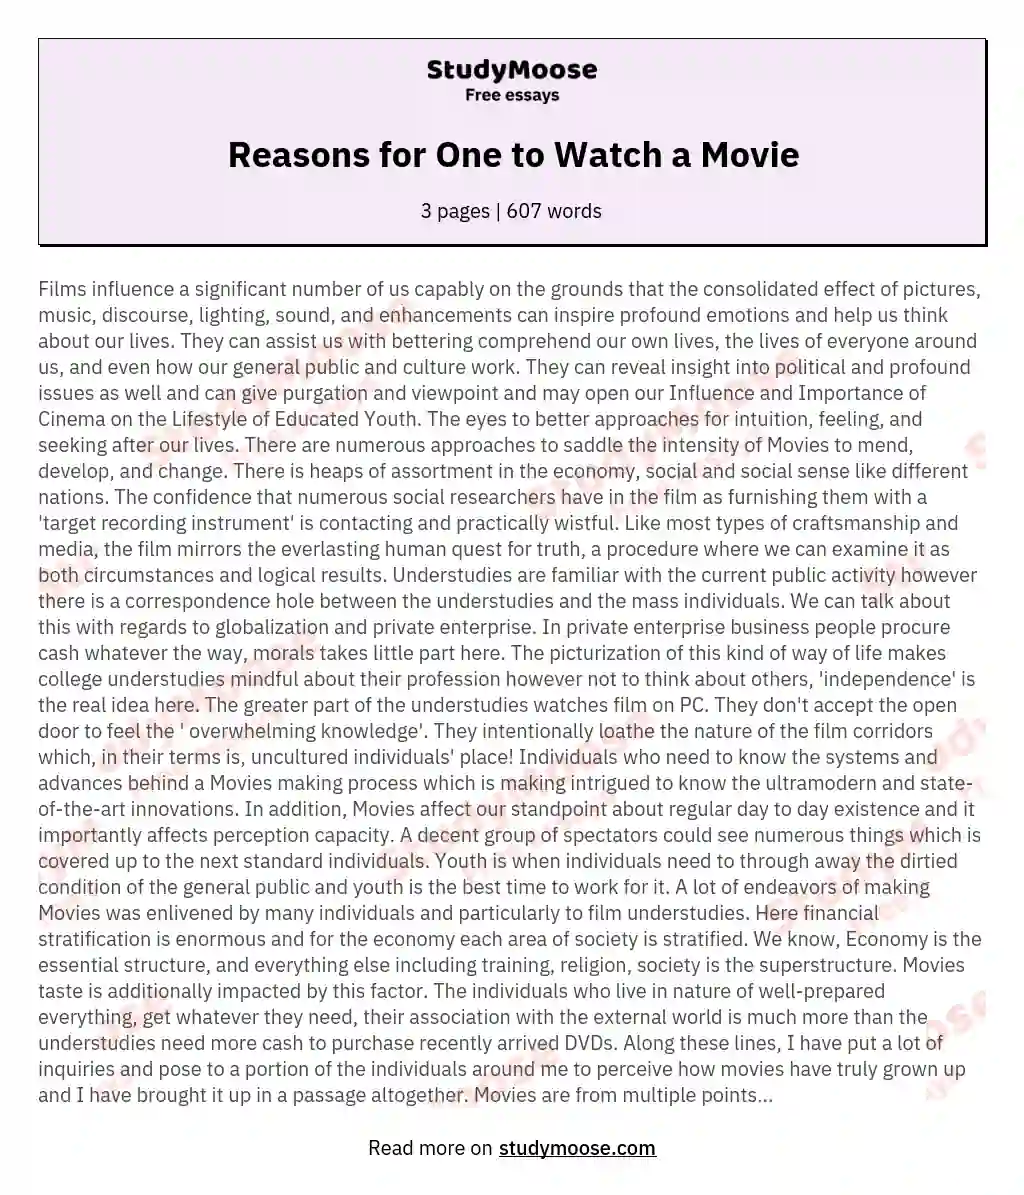 Reasons for One to Watch a Movie essay